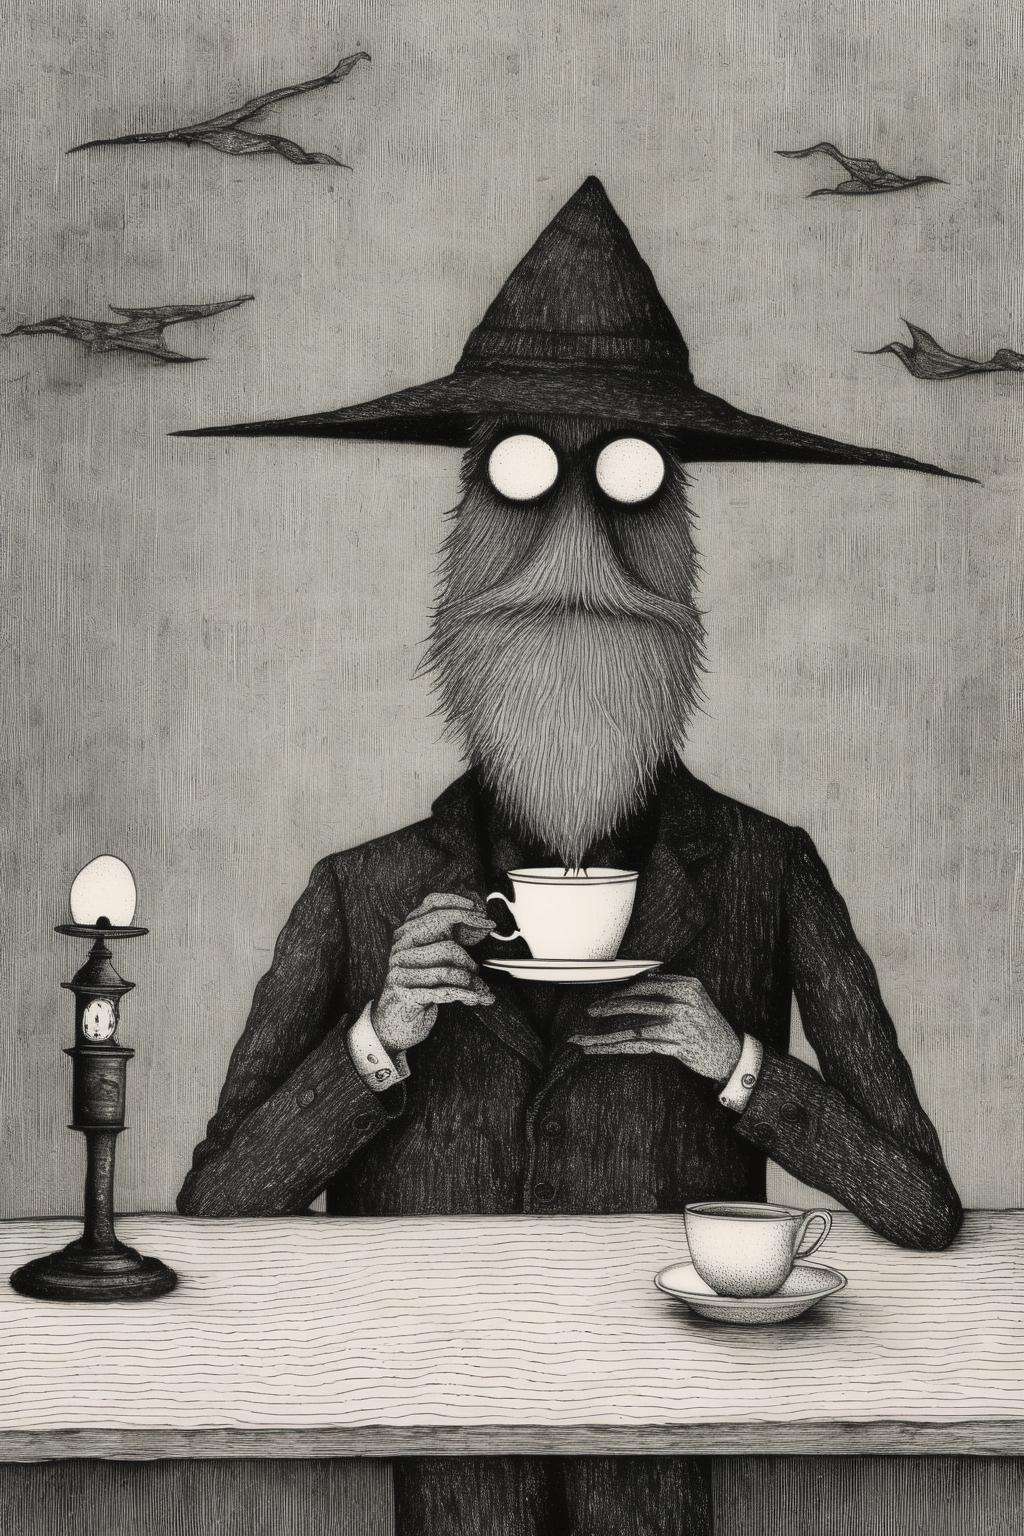 <lora:Edward Gorey Style:1>Edward Gorey Style - a suspicious looking man drinks a cup of coffee, pen and ink illustration